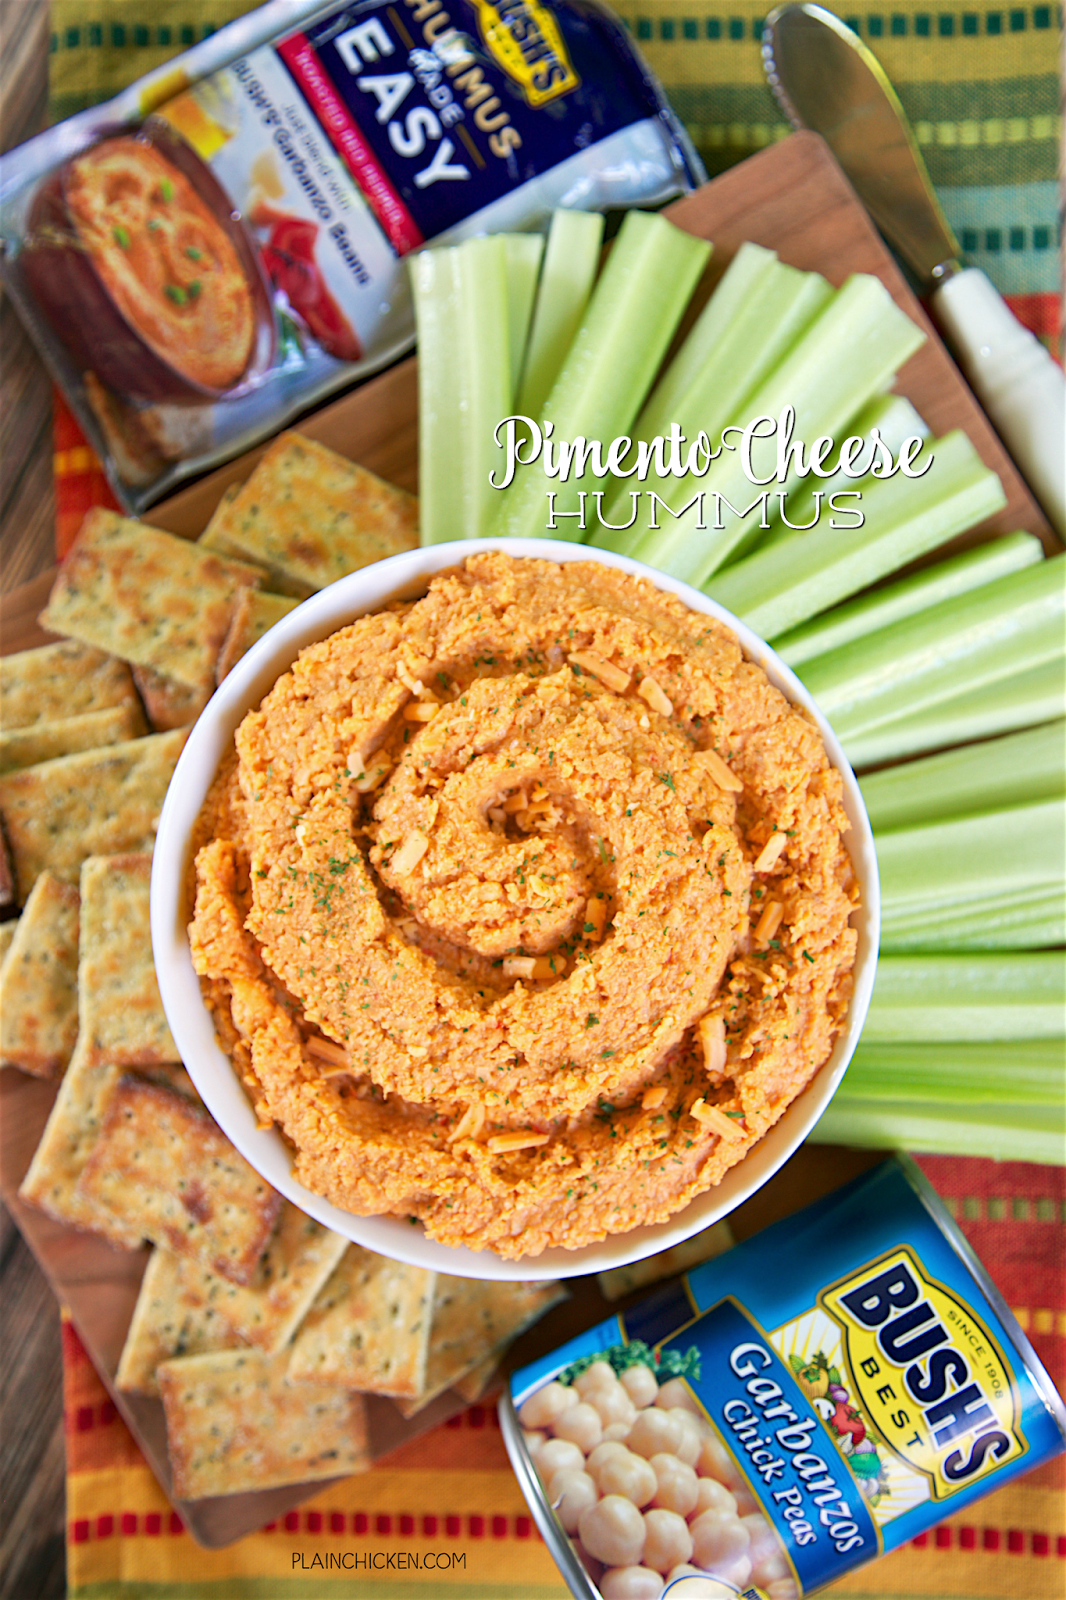 3-Ingredient Pimento Cheese Hummus - Bush's Garbanzo beans, Bush's Roasted Red Pepper Hummus Made Easy and cheddar cheese. Ridiculously easy and crazy delicious! Ready in about a minute! Whip this up when you need a last minute snack. Great for parties and tailgates!!